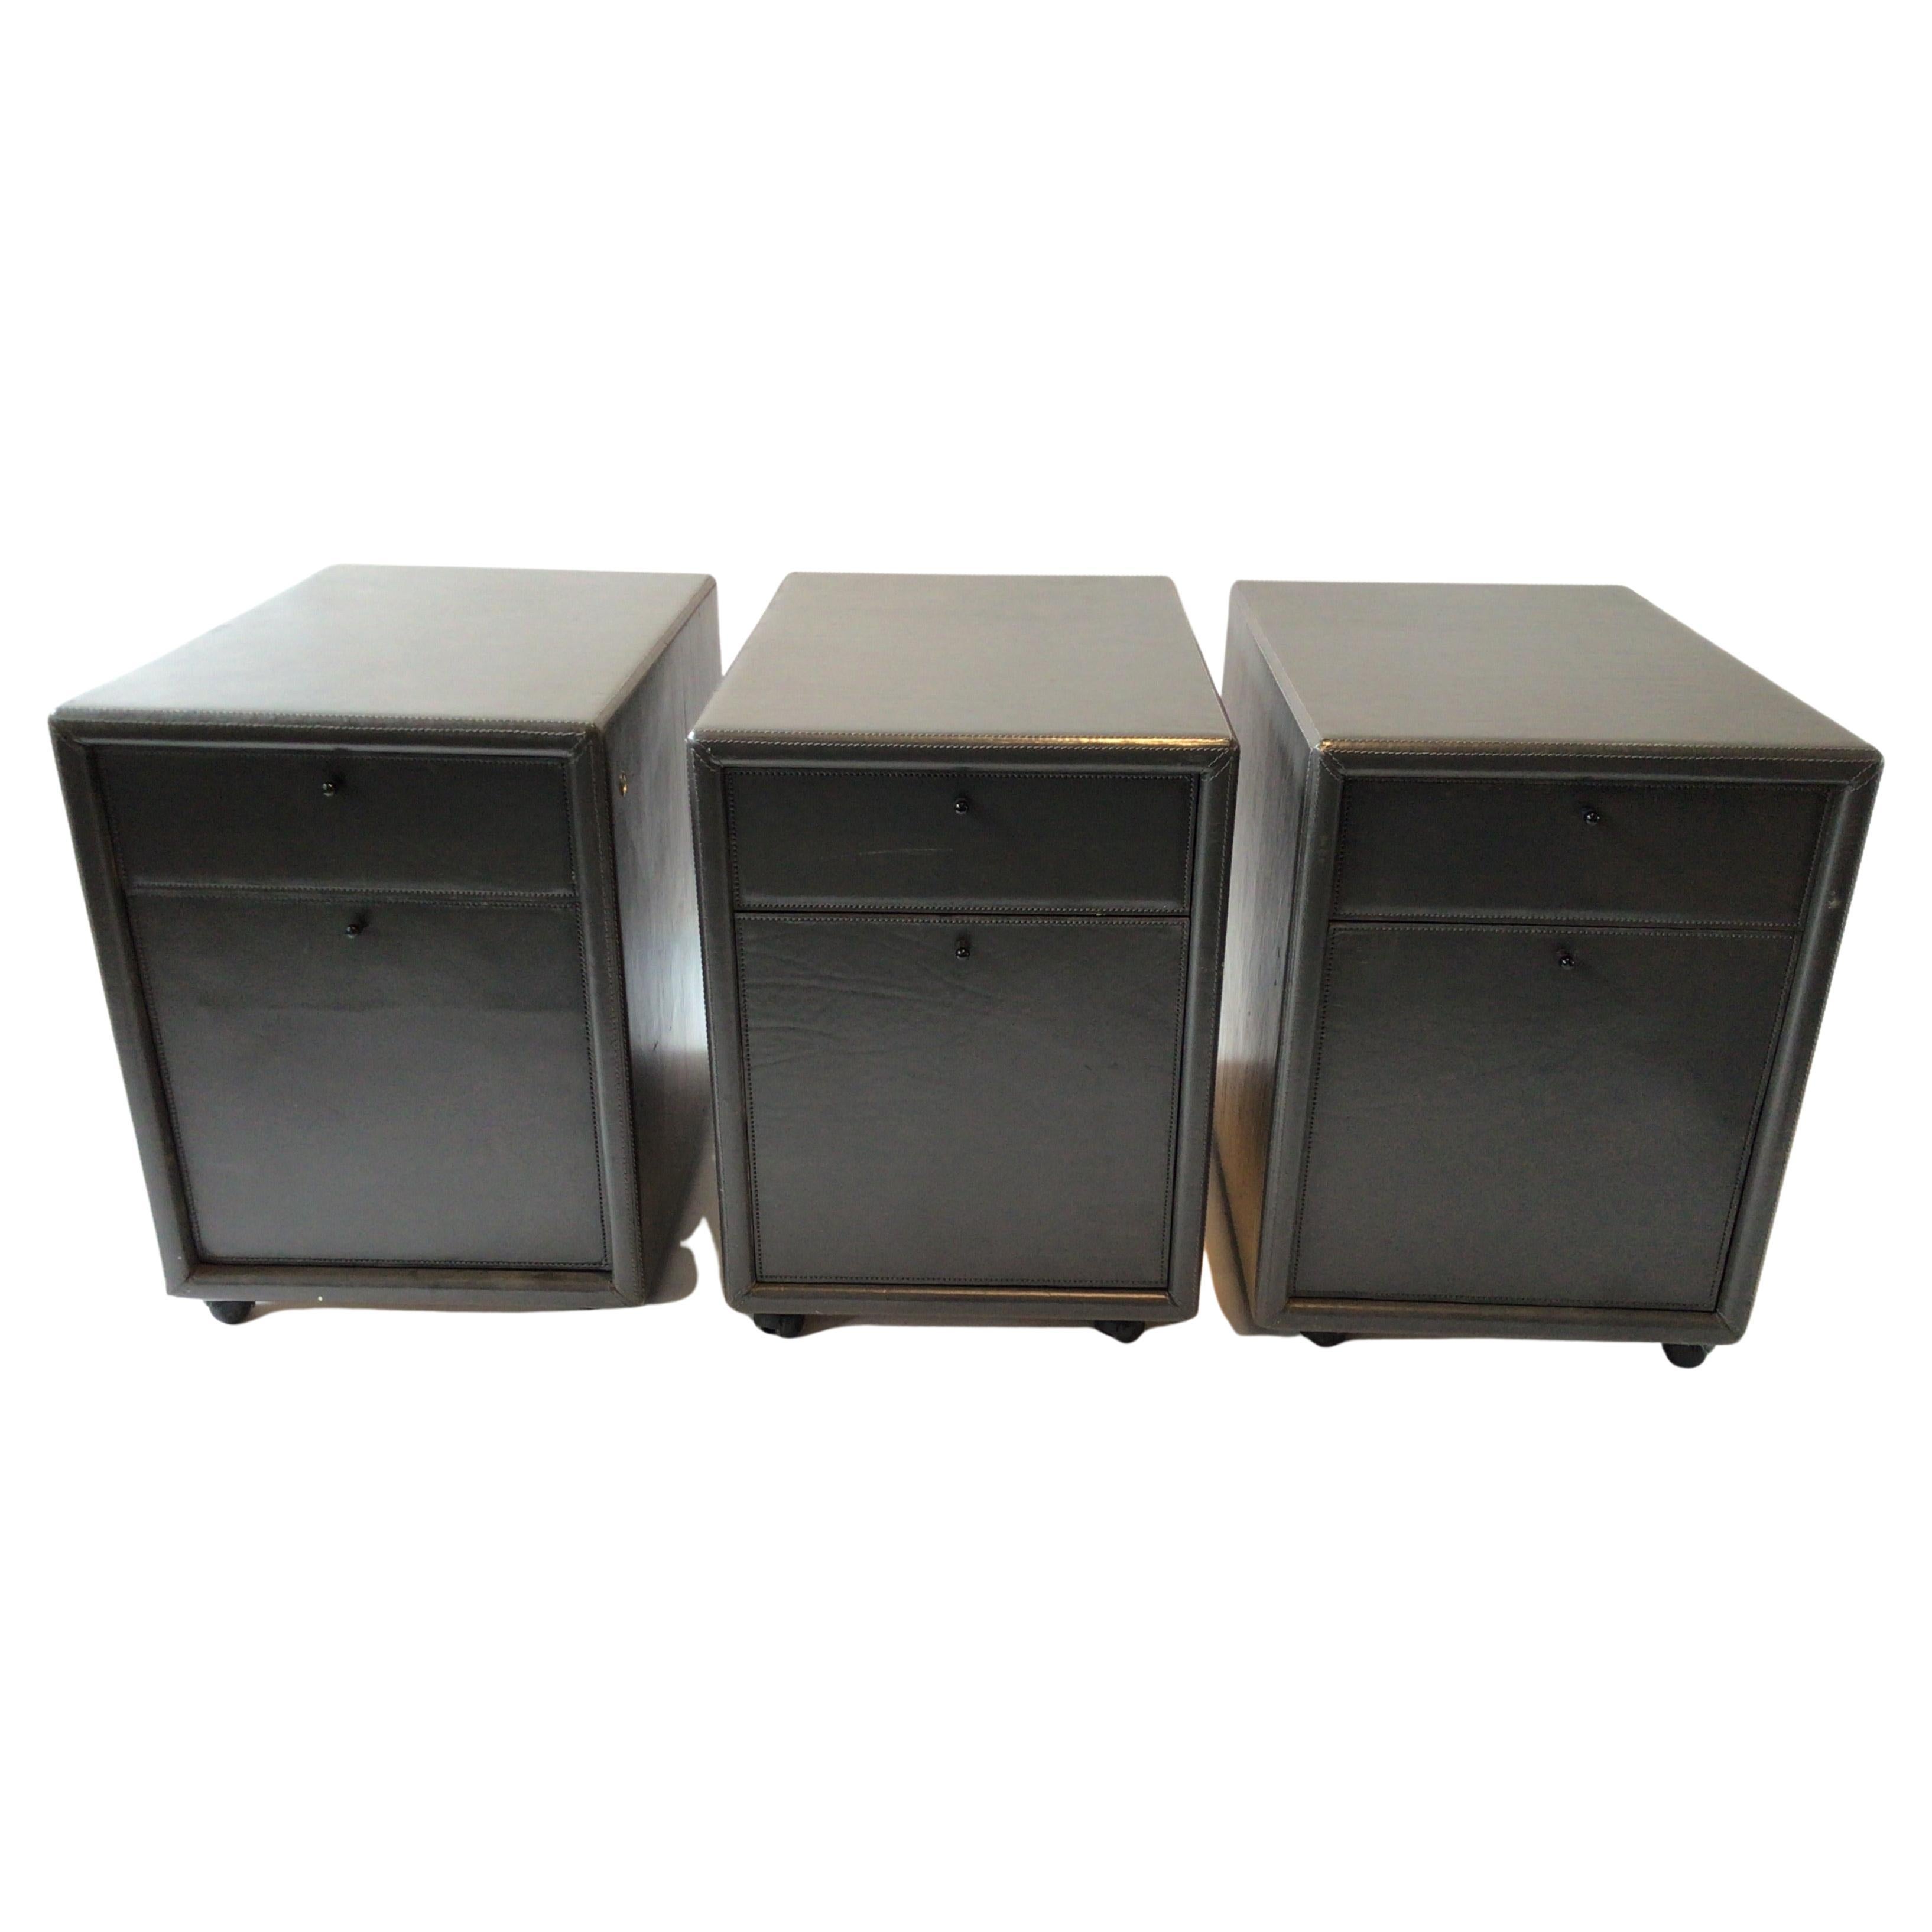 3 Cy Mann Italian Leather File Cabinets For Sale